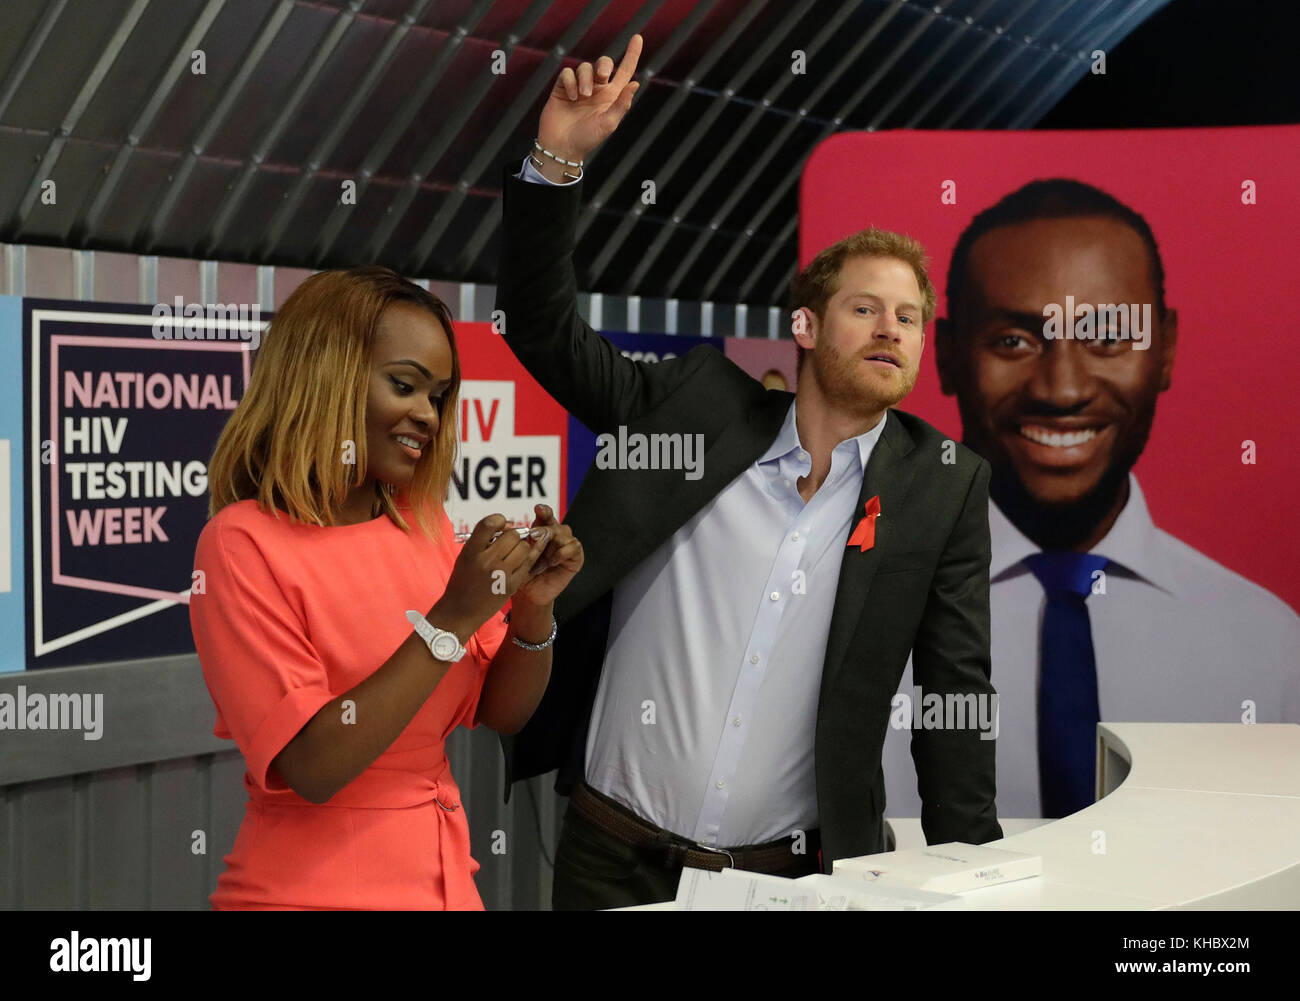 Yvette Twagiramariya, one of the faces of the 'It Starts With Me' campaign, demonstrates an HIV self-testing kit to Prince Harry at the opening of the Terrence Higgins Trust (THT) HIV testing pop-up shop in Hackney, London. Stock Photo